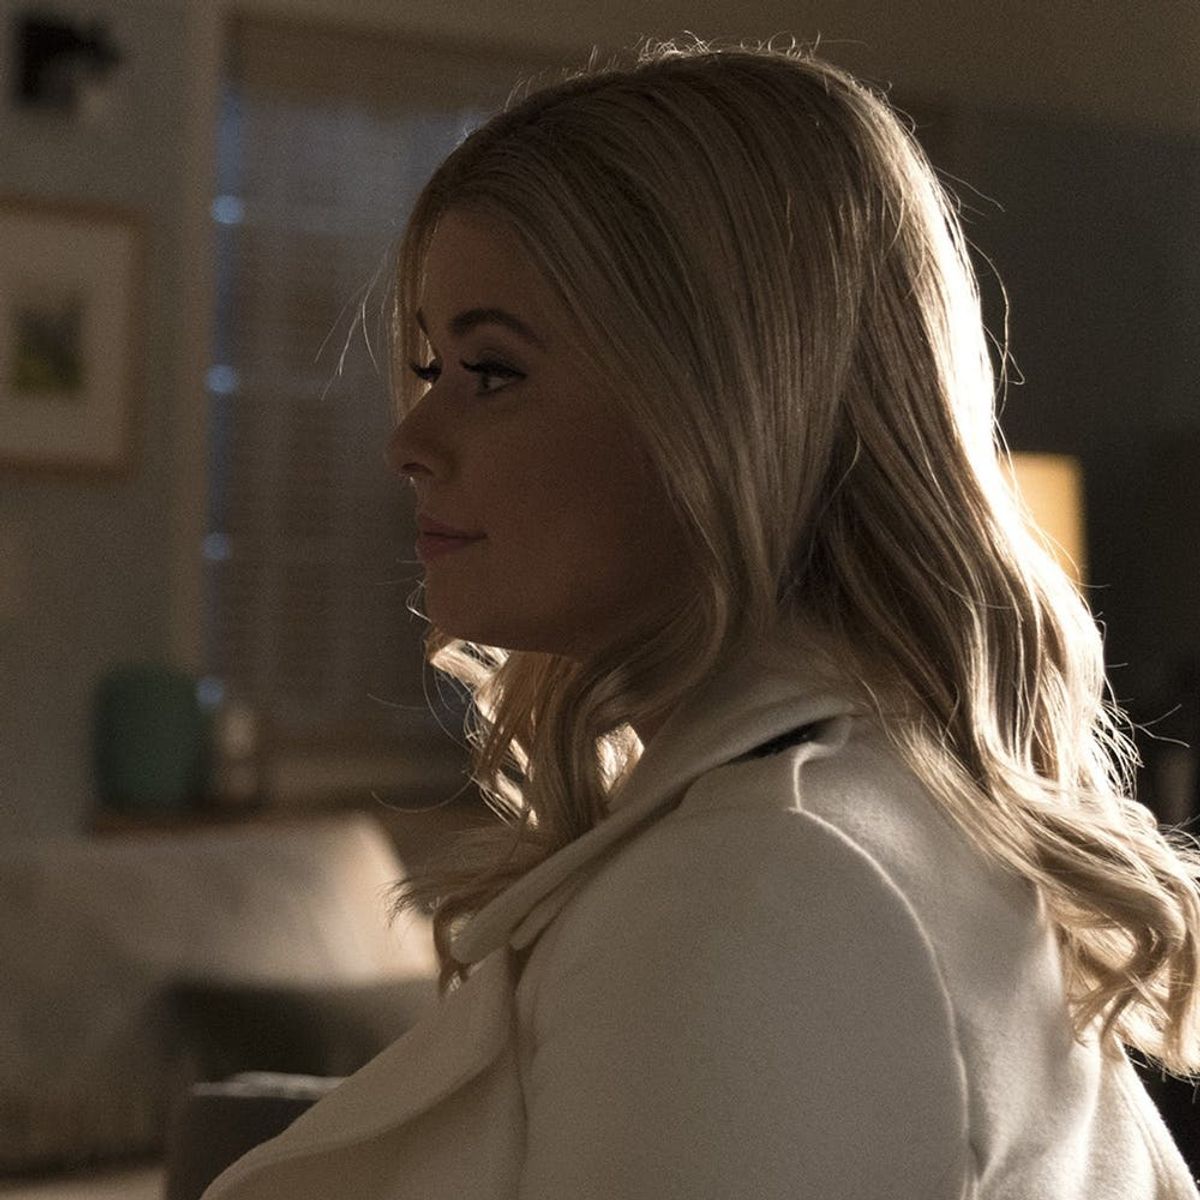 Here’s Your First Look at the ‘Pretty Little Liars’ Spinoff ‘The Perfectionists’